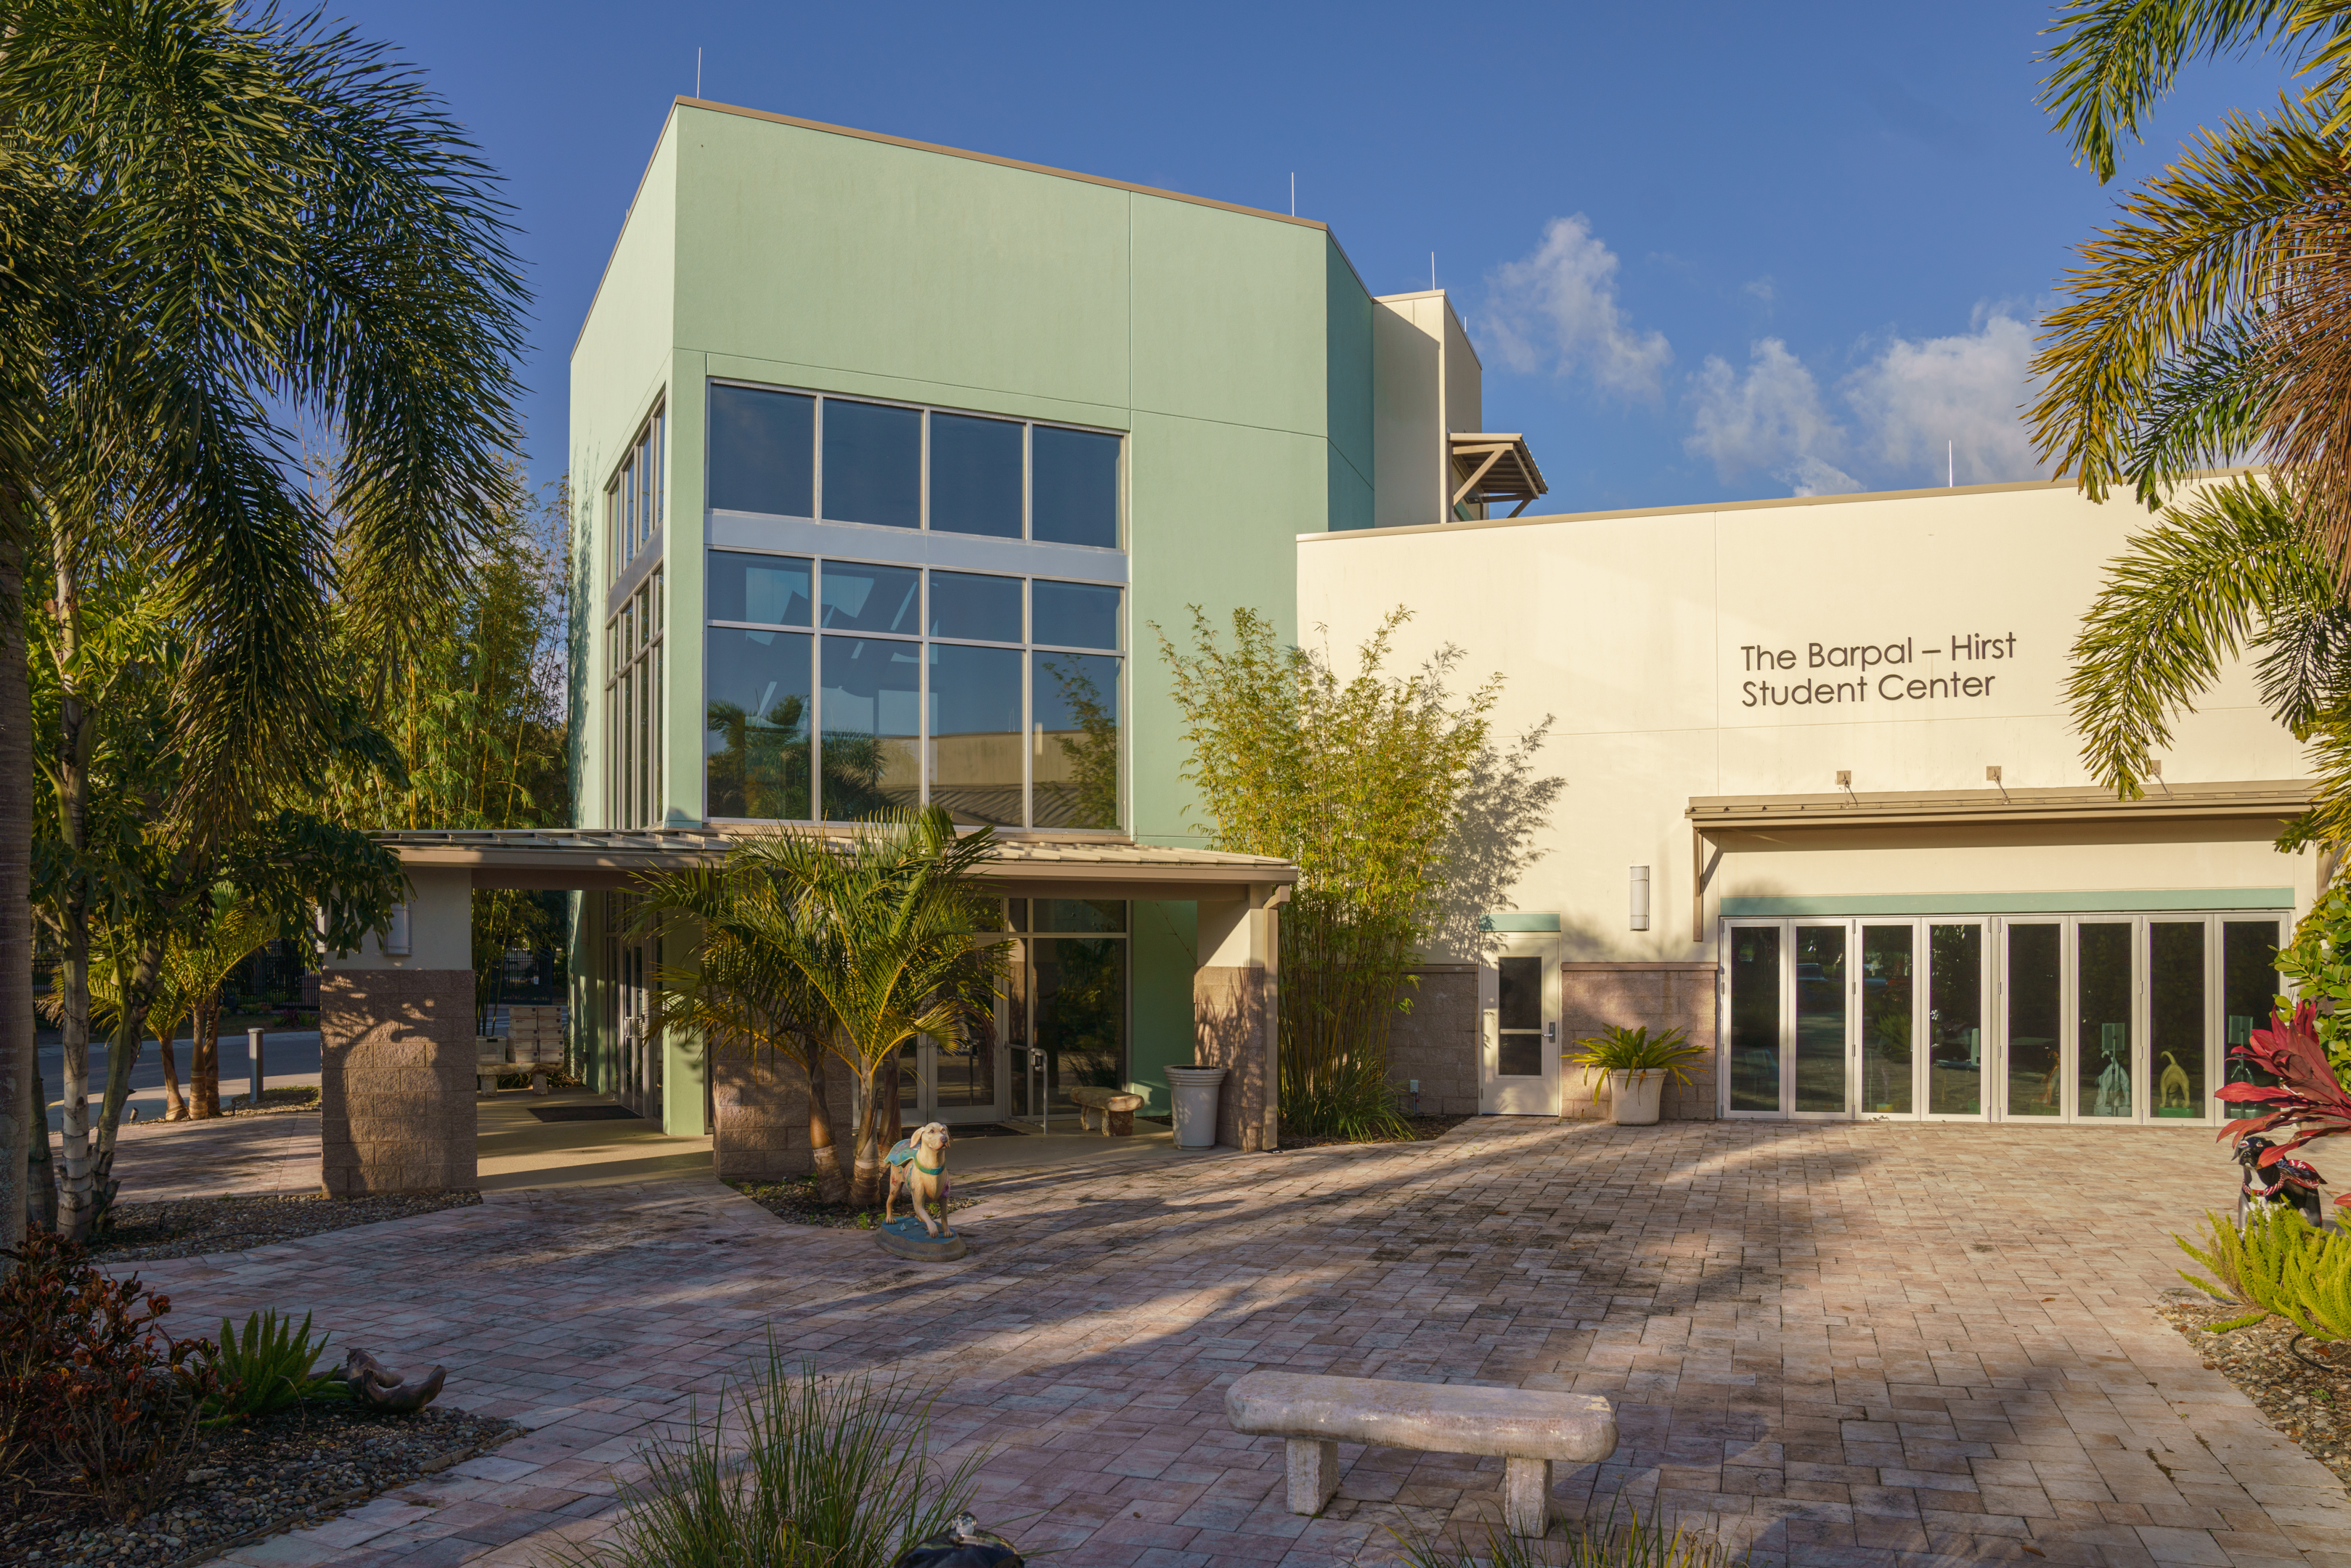 A photo of the exterior of The Barpal - Hirst Student Center at the Dogs Inc campus in Palmetto, Florida.